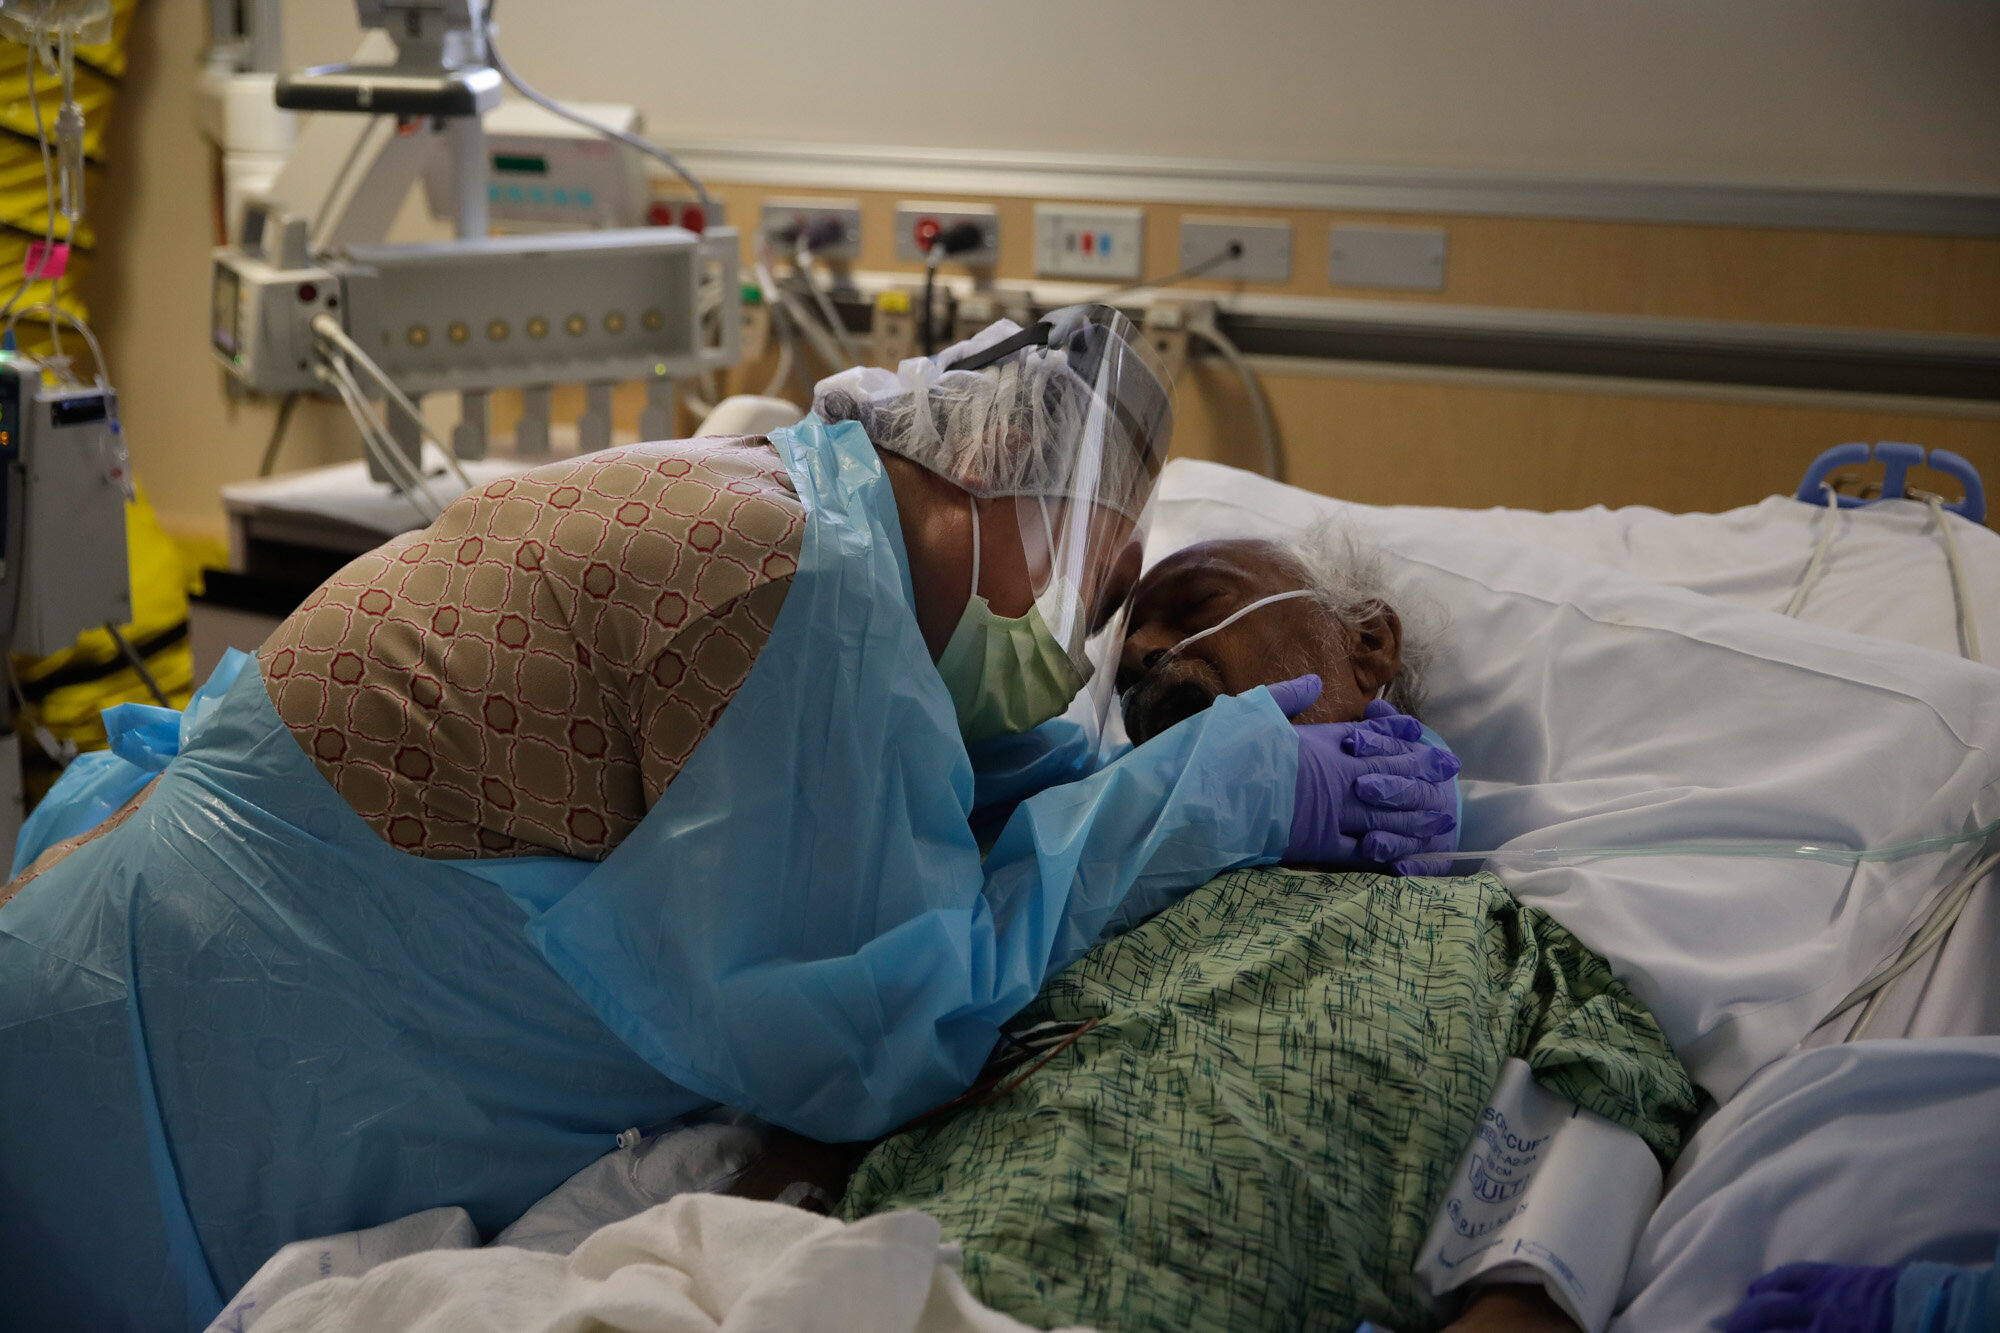  Romelia Navarro, 64, weeps while hugging her husband, Antonio, in his final moments in a COVID-19 unit at St. Jude Medical Center in Fullerton, Calif., on July 31, 2020. (AP Photo/Jae C. Hong) 